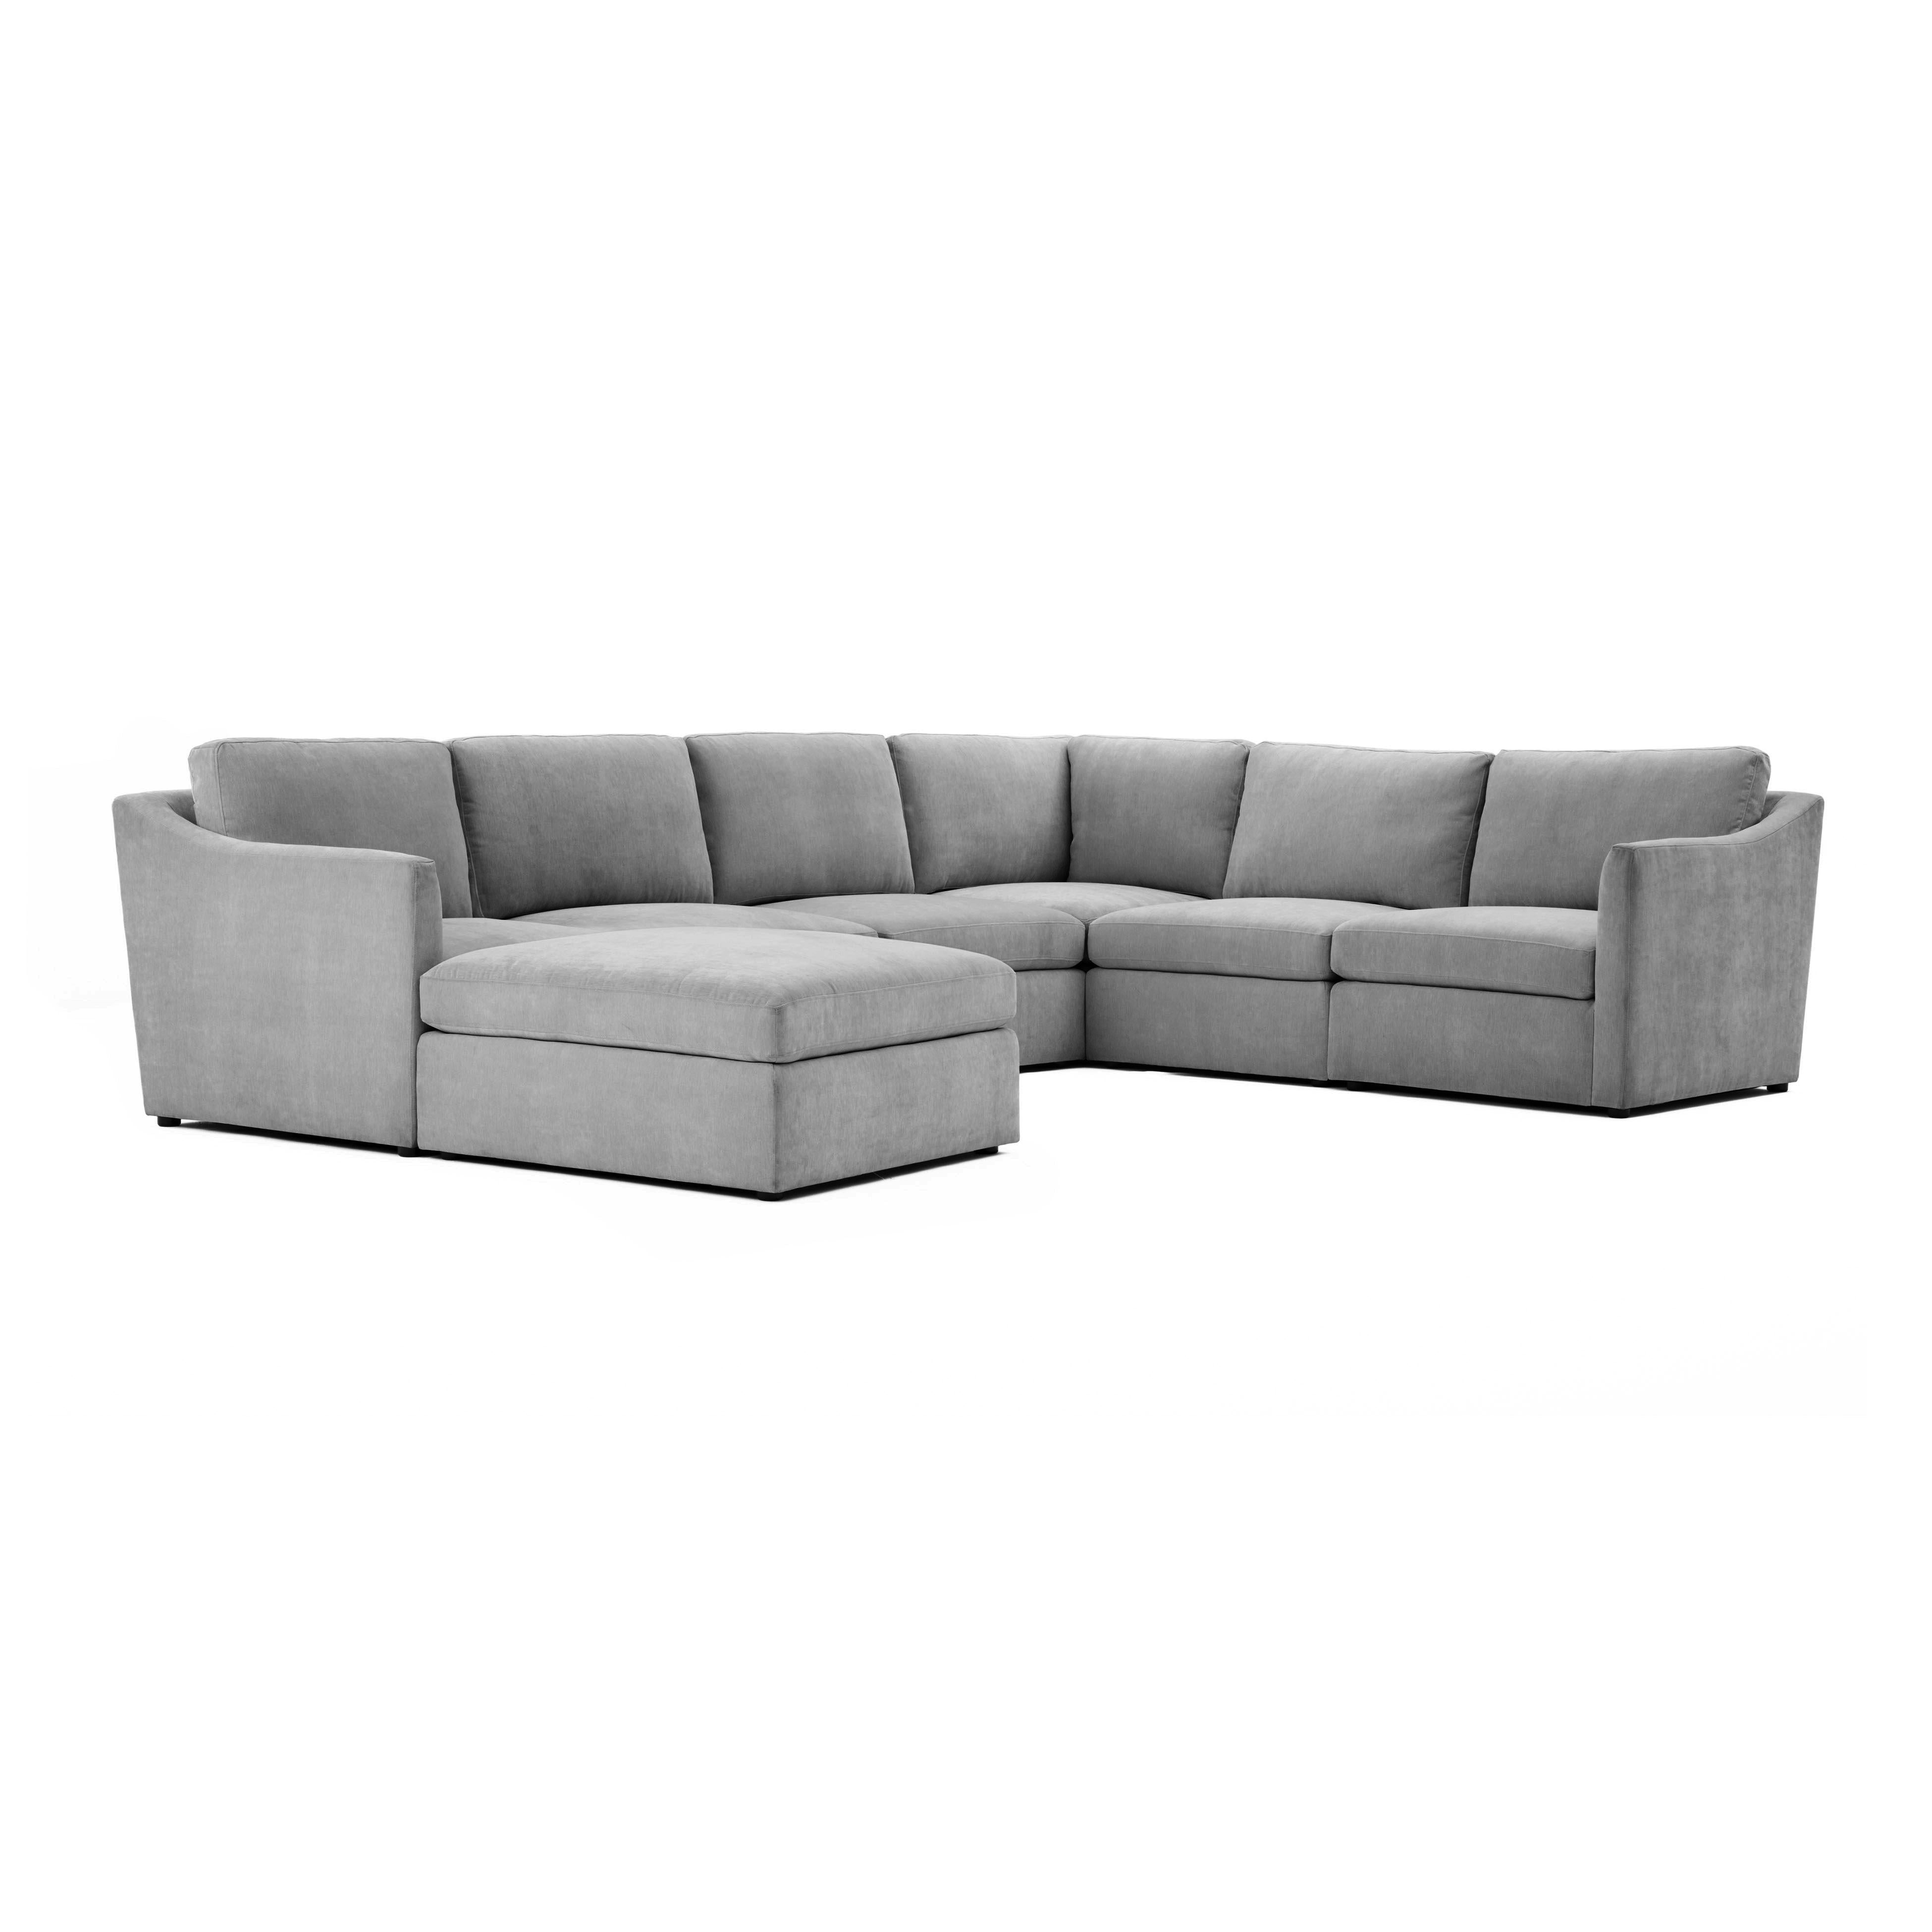 Tov Furniture Sectionals - Aiden Gray Modular Large Chaise Sectional